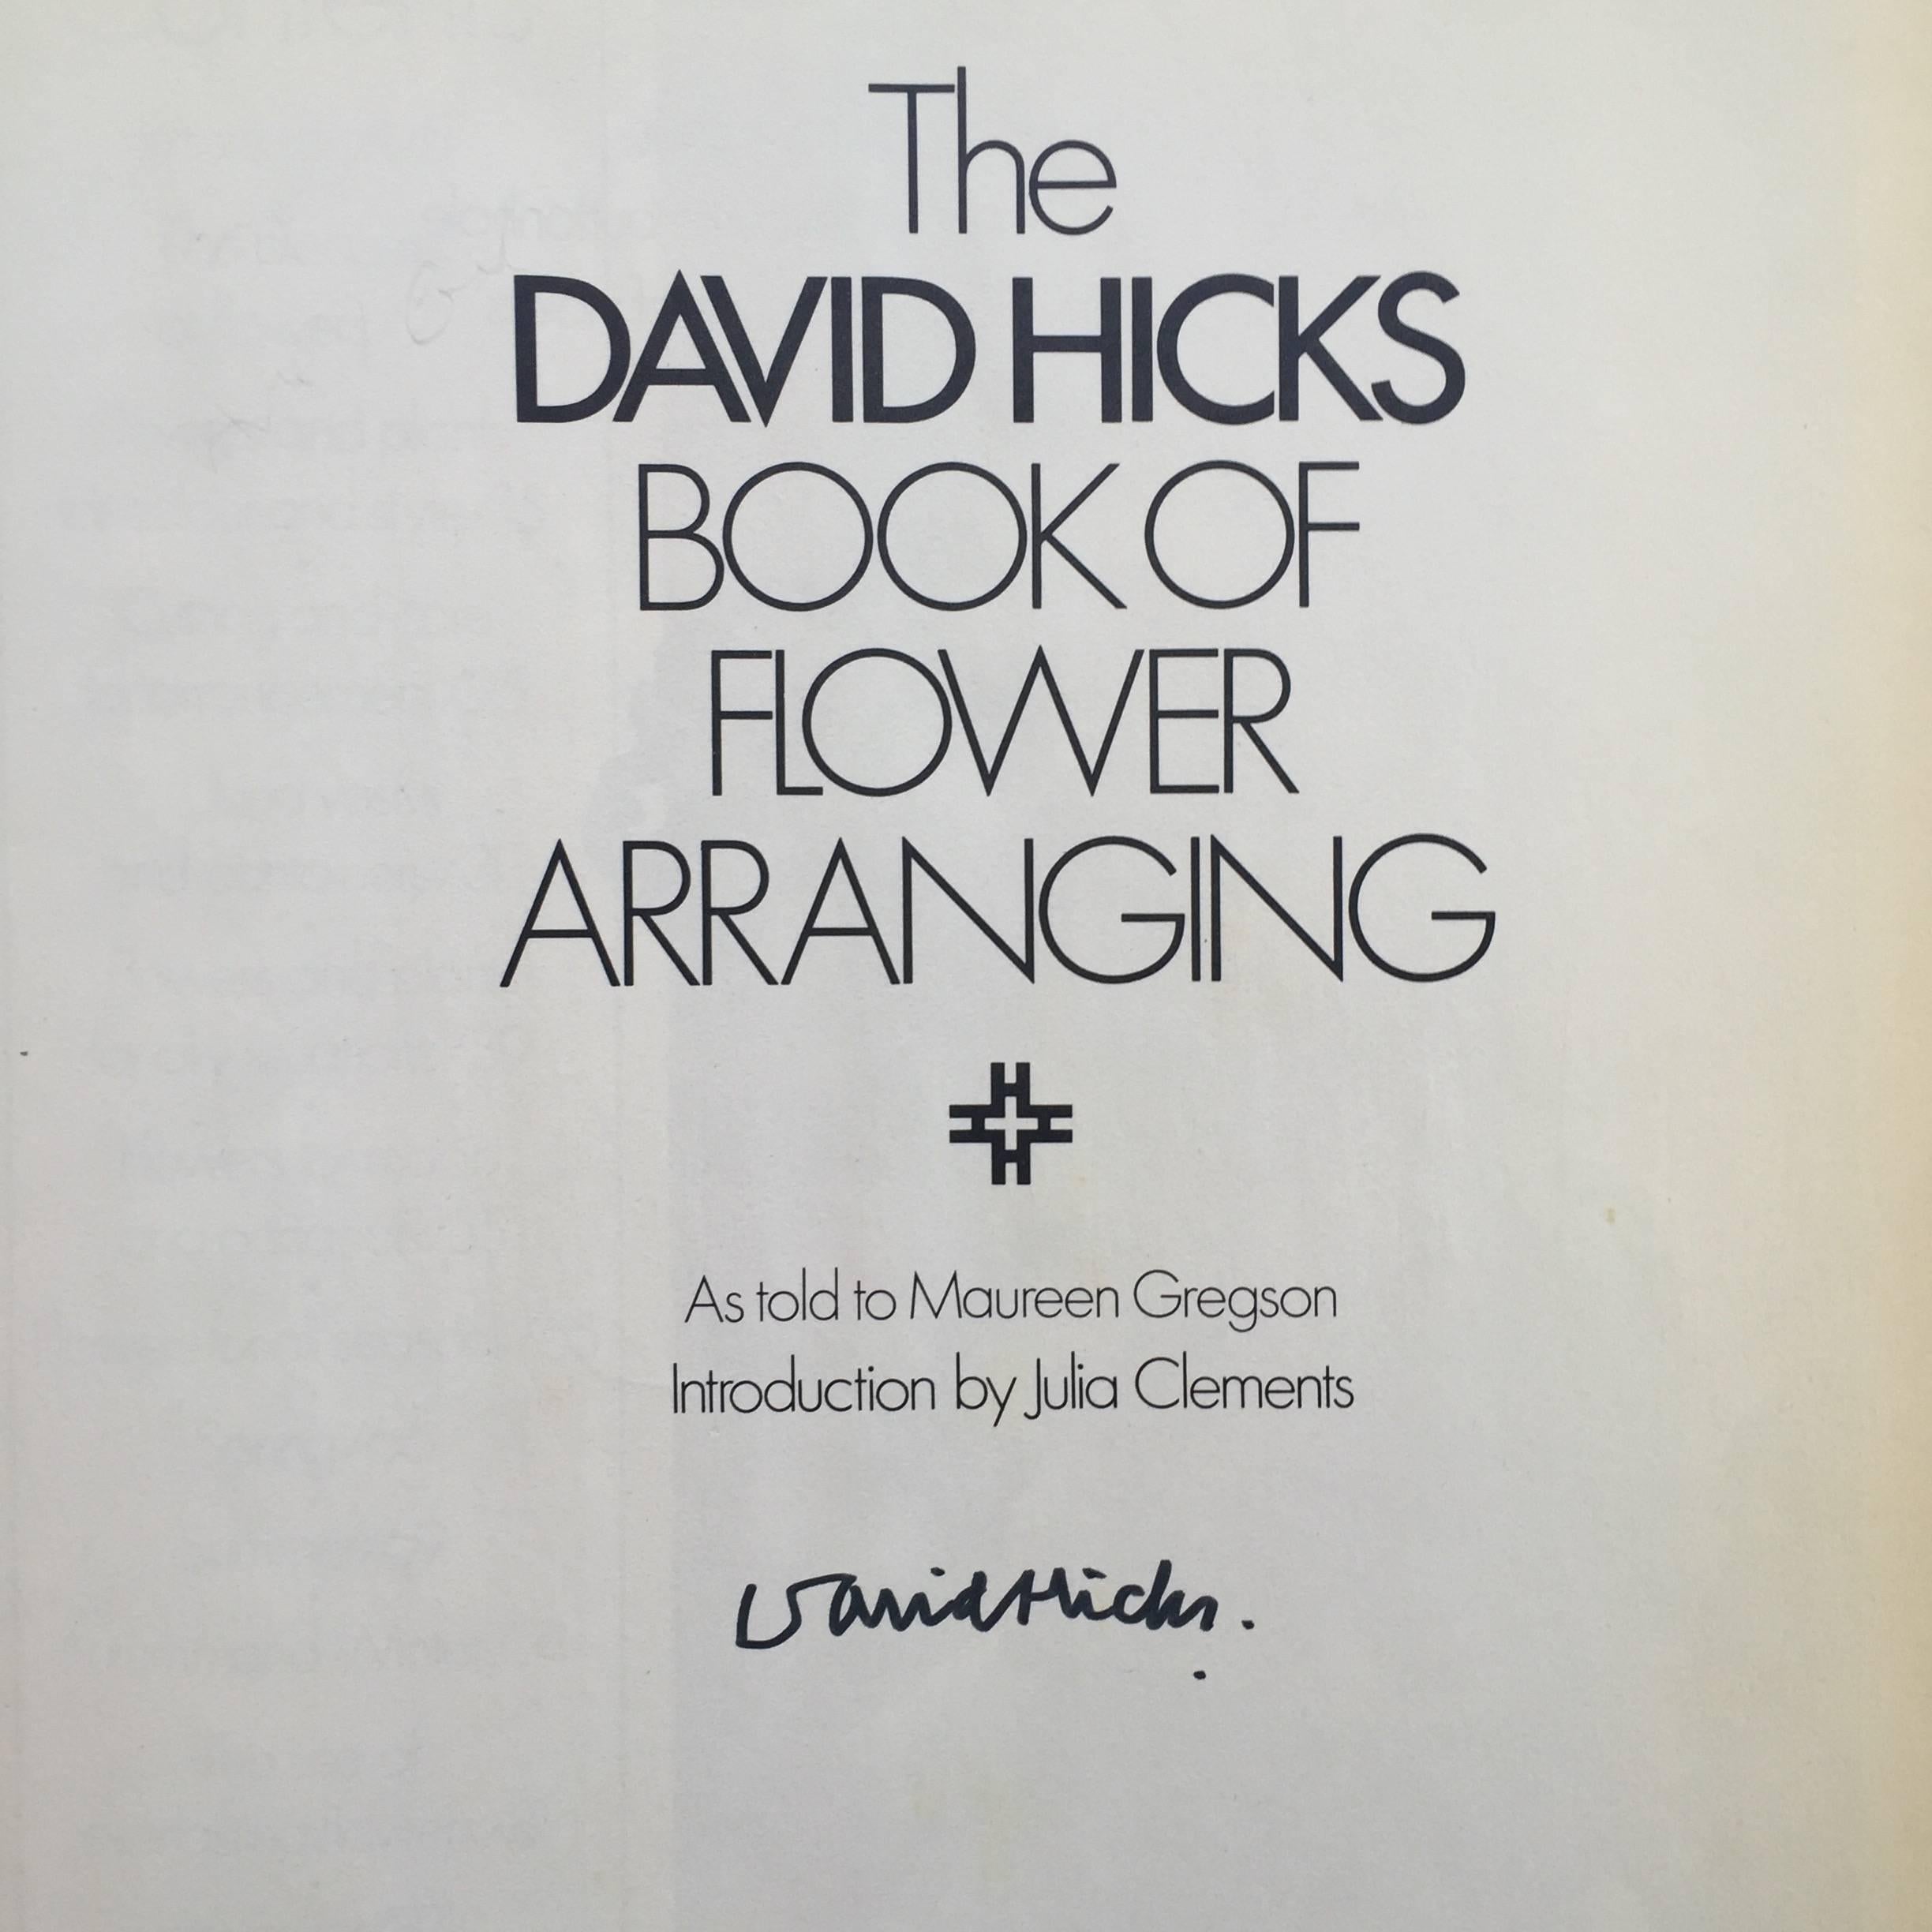 First edition, published by Marshall Cavendish Limited, London, 1976

David Hicks’ panache is evident even in his flower arrangements; the plants embody the environment they find themselves in. Treated almost as art objects, these pieces add a